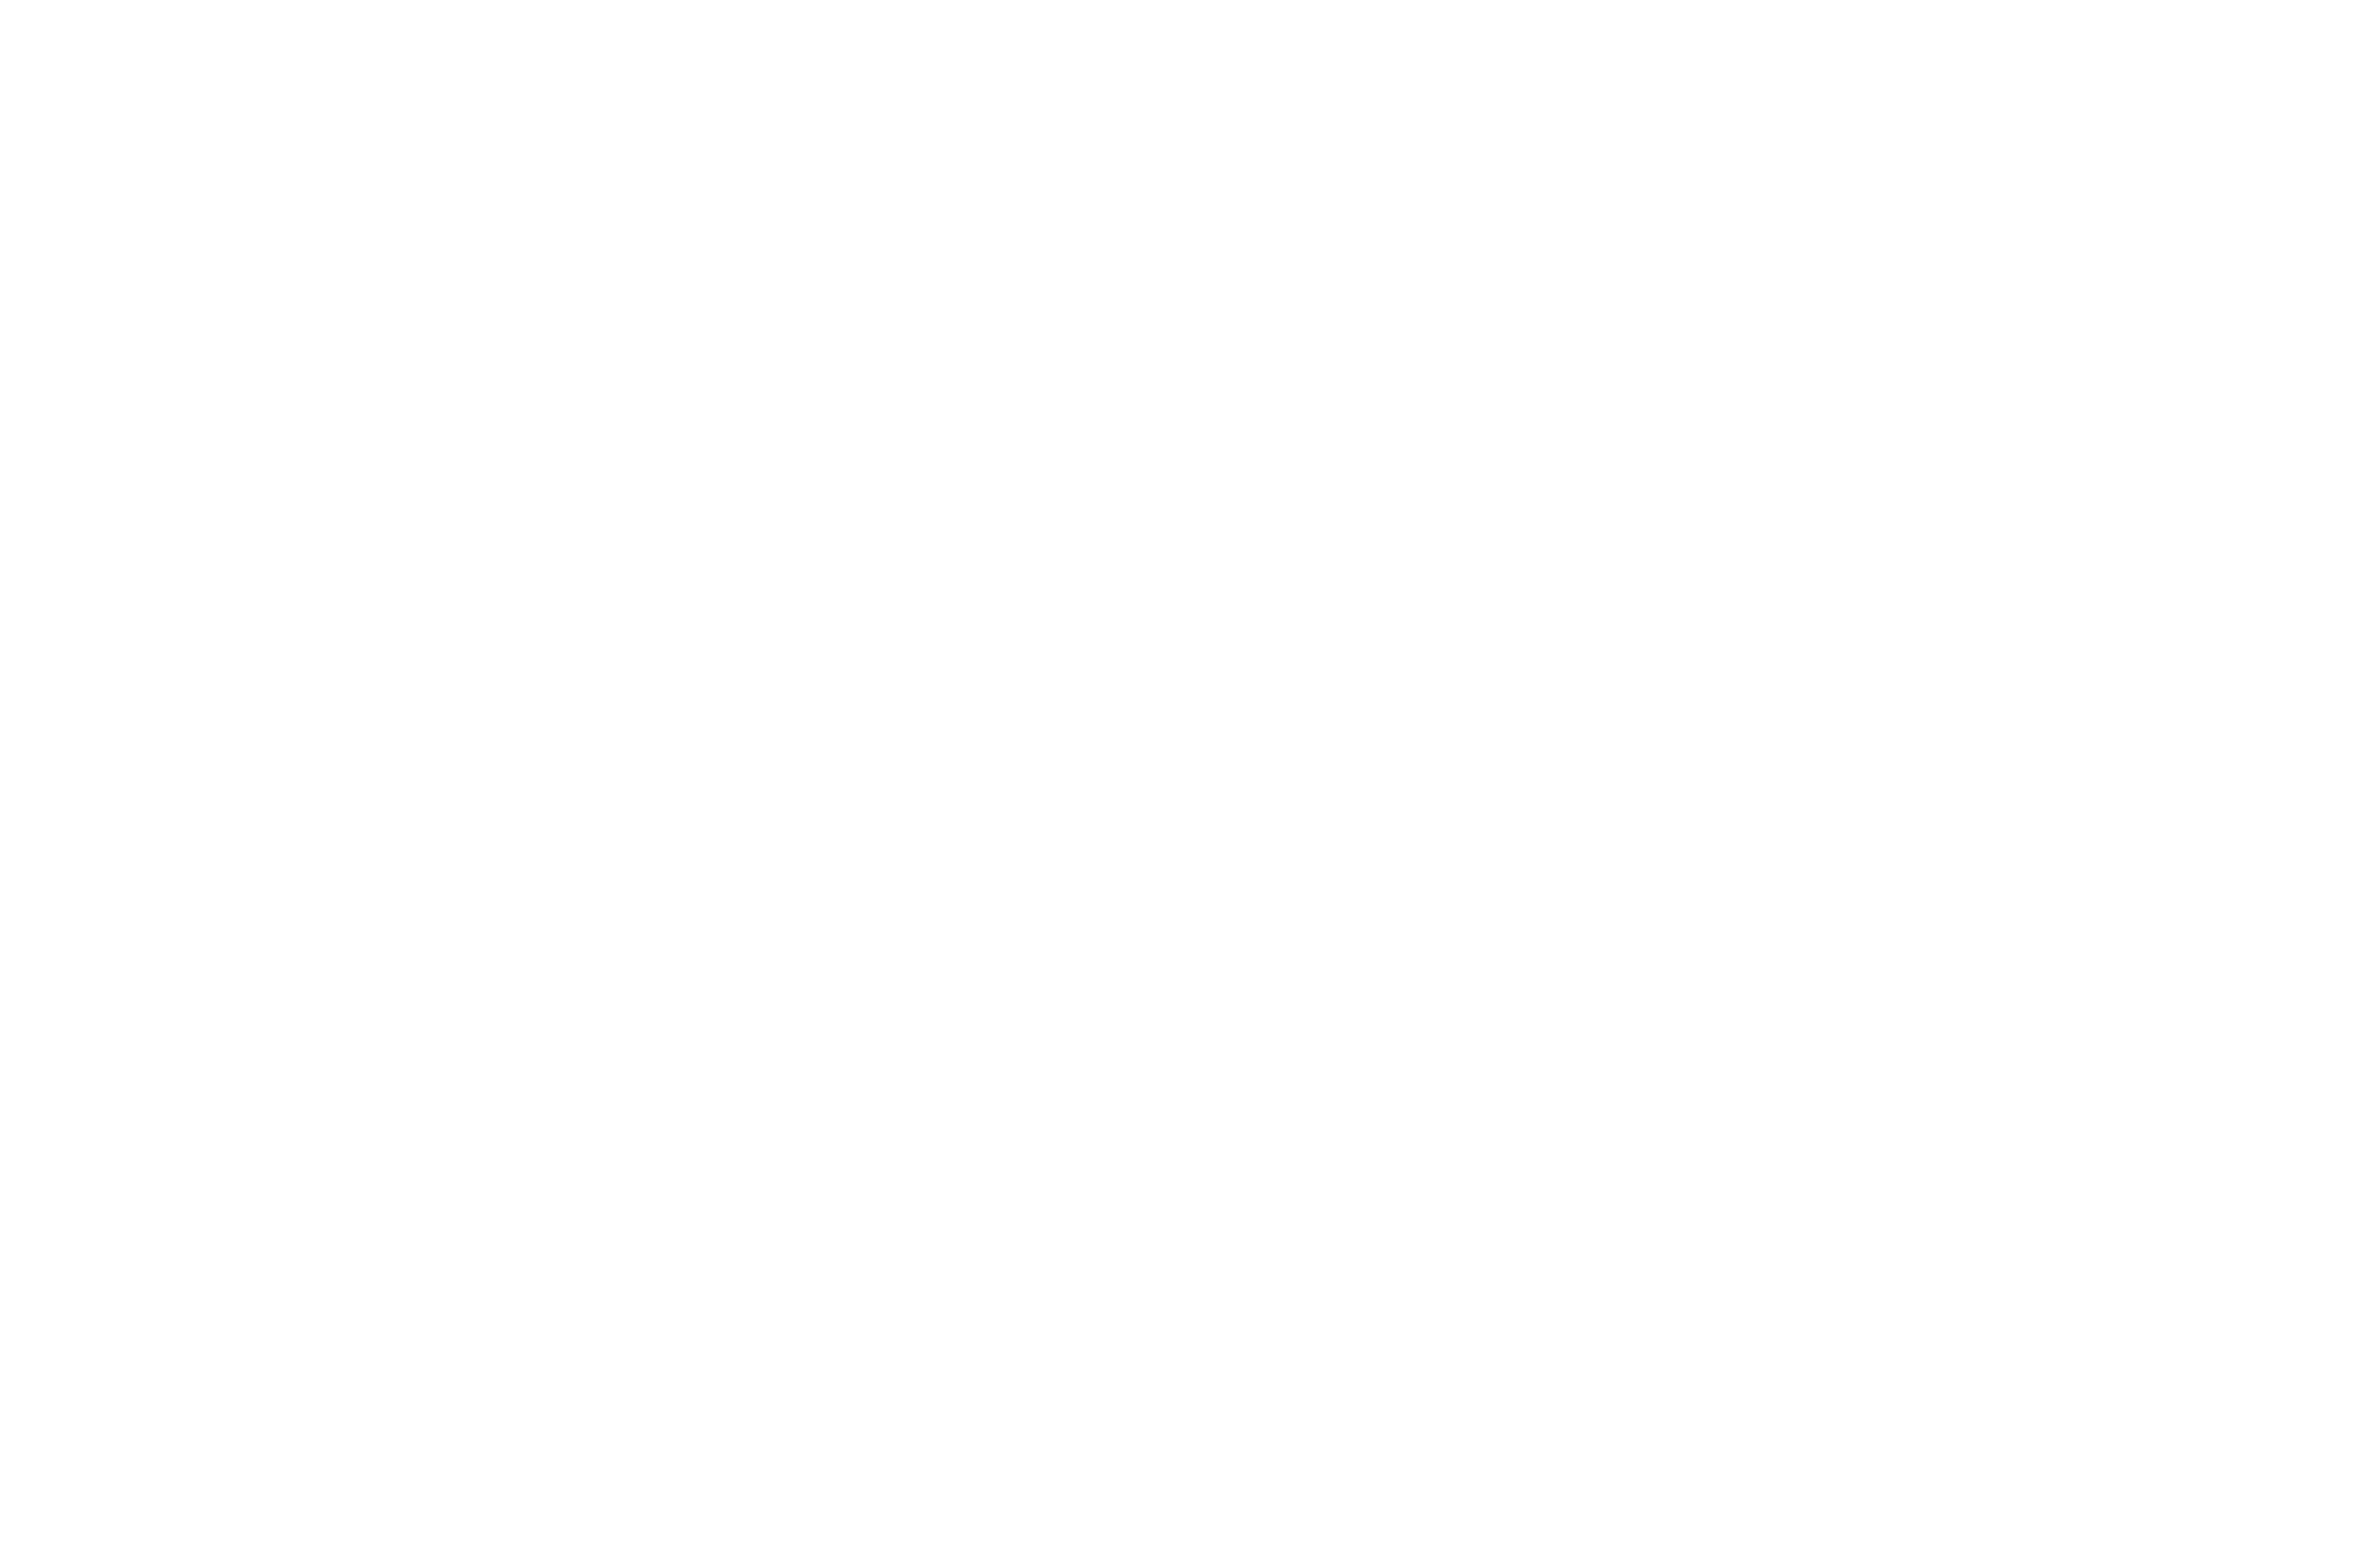 Connolly Hayes